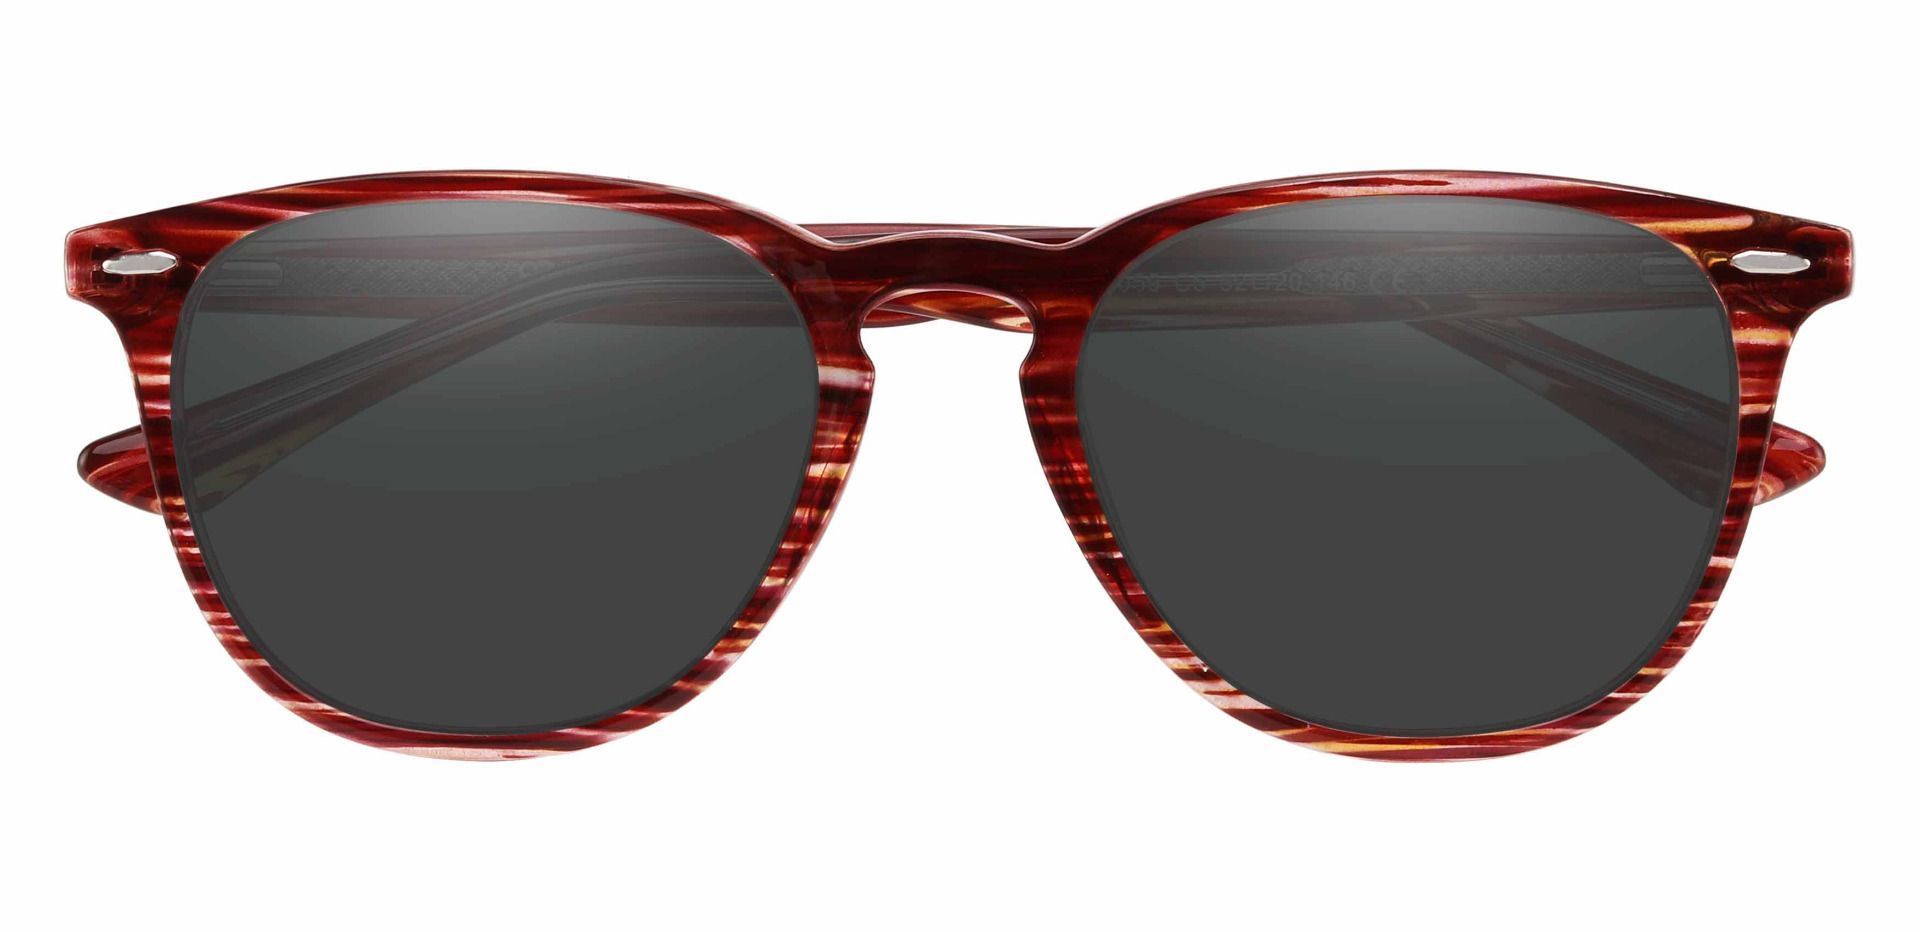 Sycamore Oval Reading Sunglasses - Red Frame With Gray Lenses